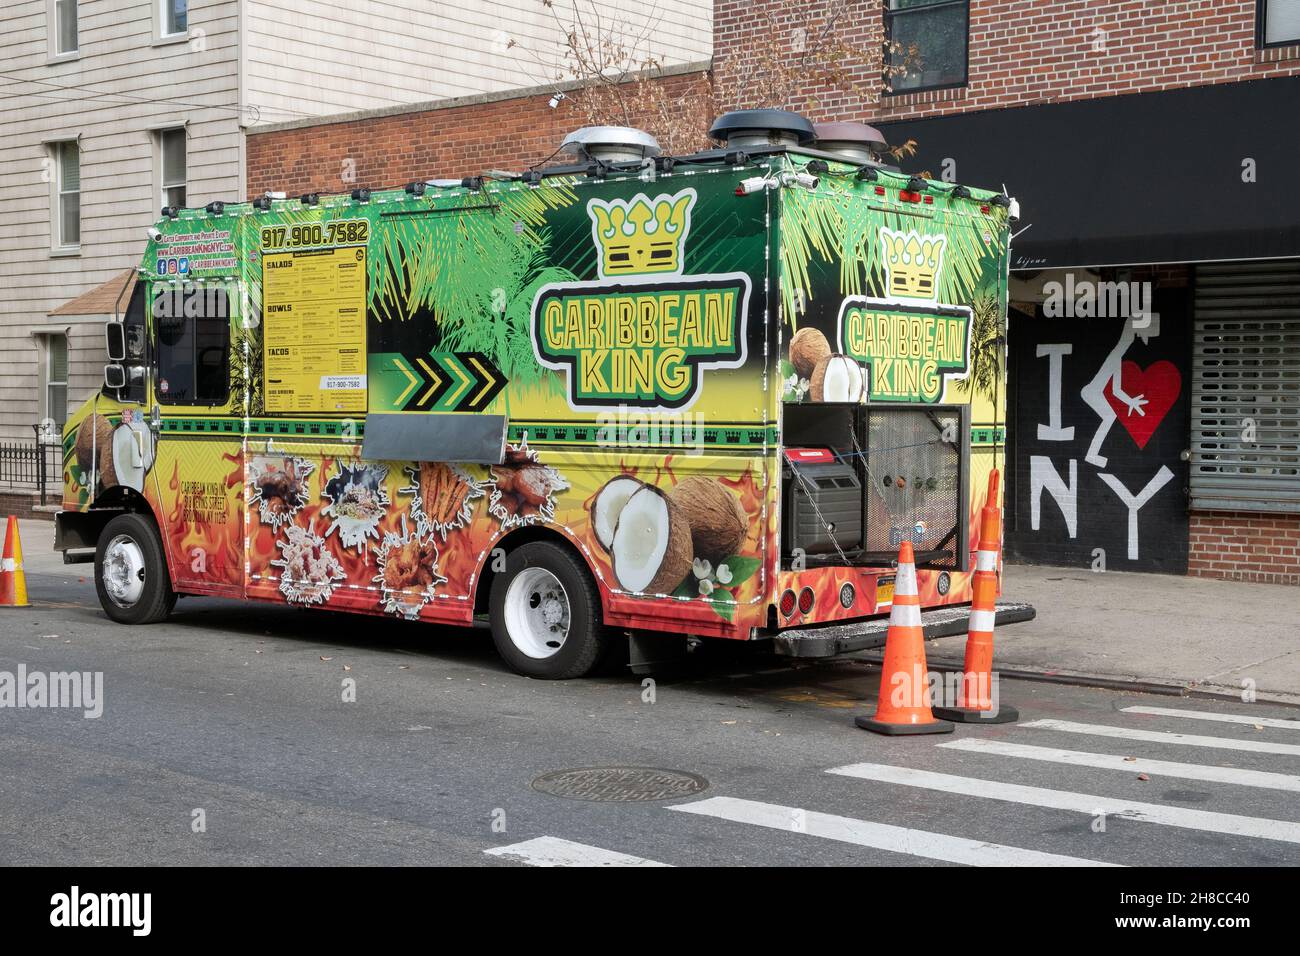 The CARIBBEAN KING food truck parked on North 4th Street off Bedford Avenue in Williamsburg, Brooklyn, New York City. Stock Photo